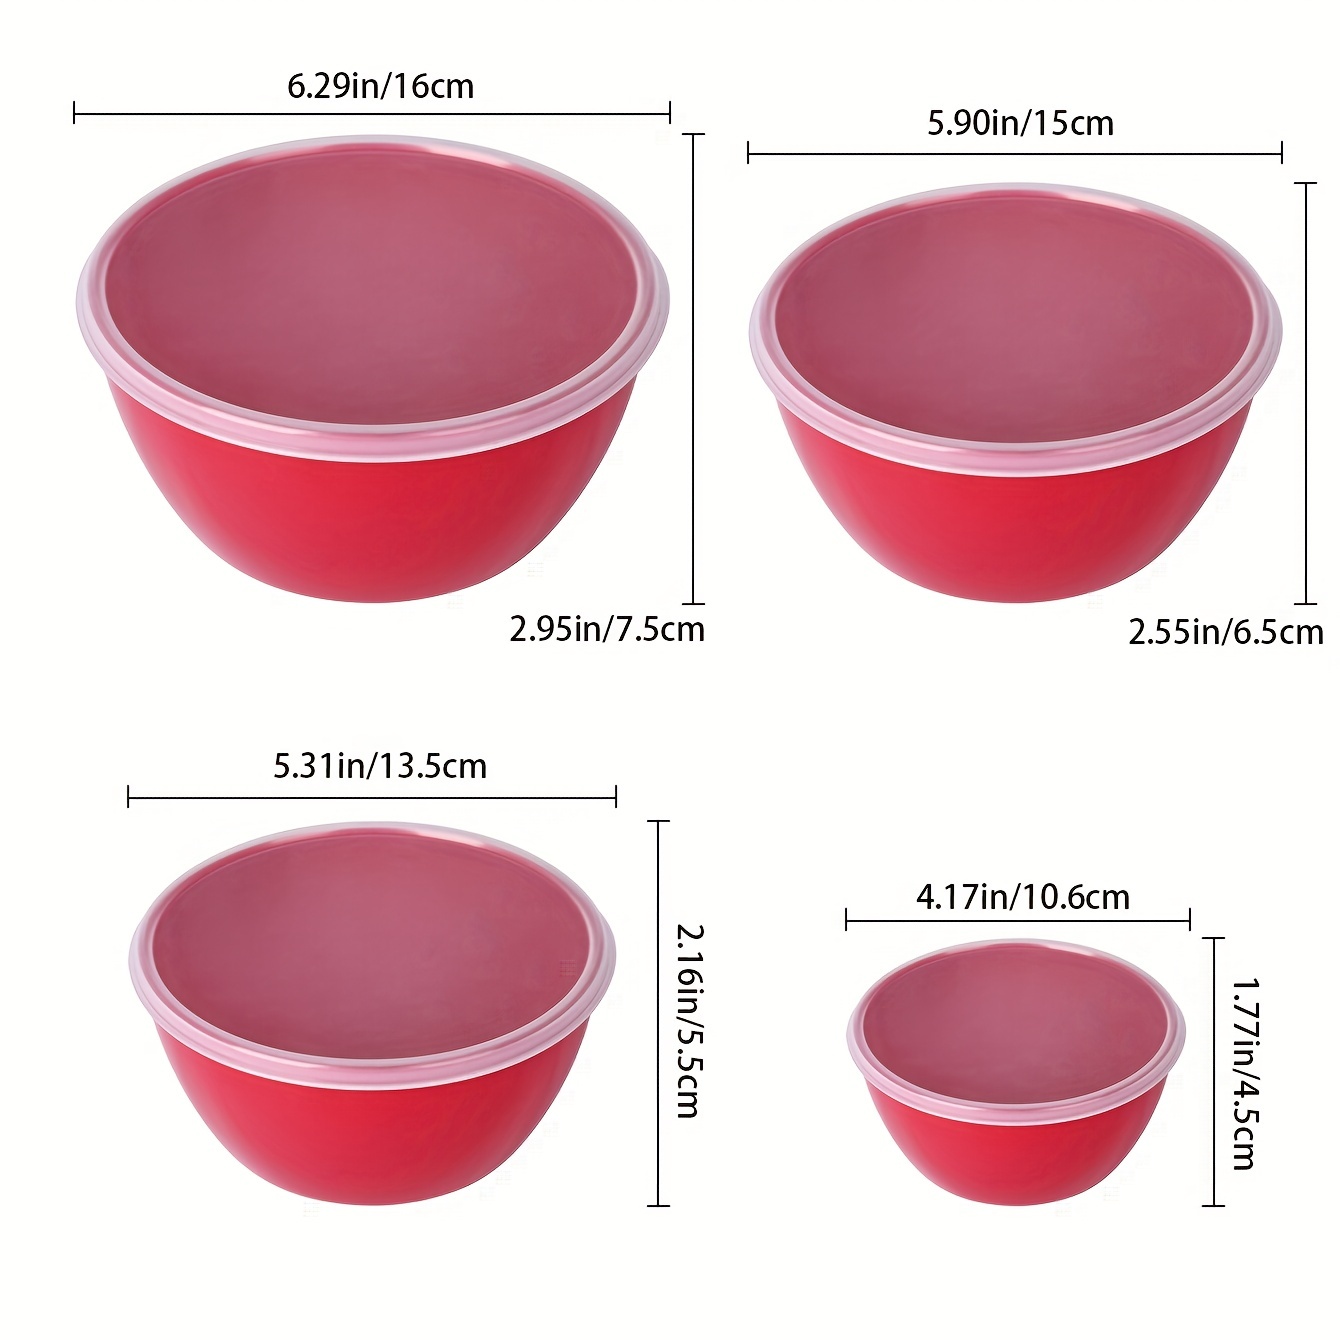 Meal Prep Bowls-4Pcs Set Perfect for Food Prep, Storage and Serve